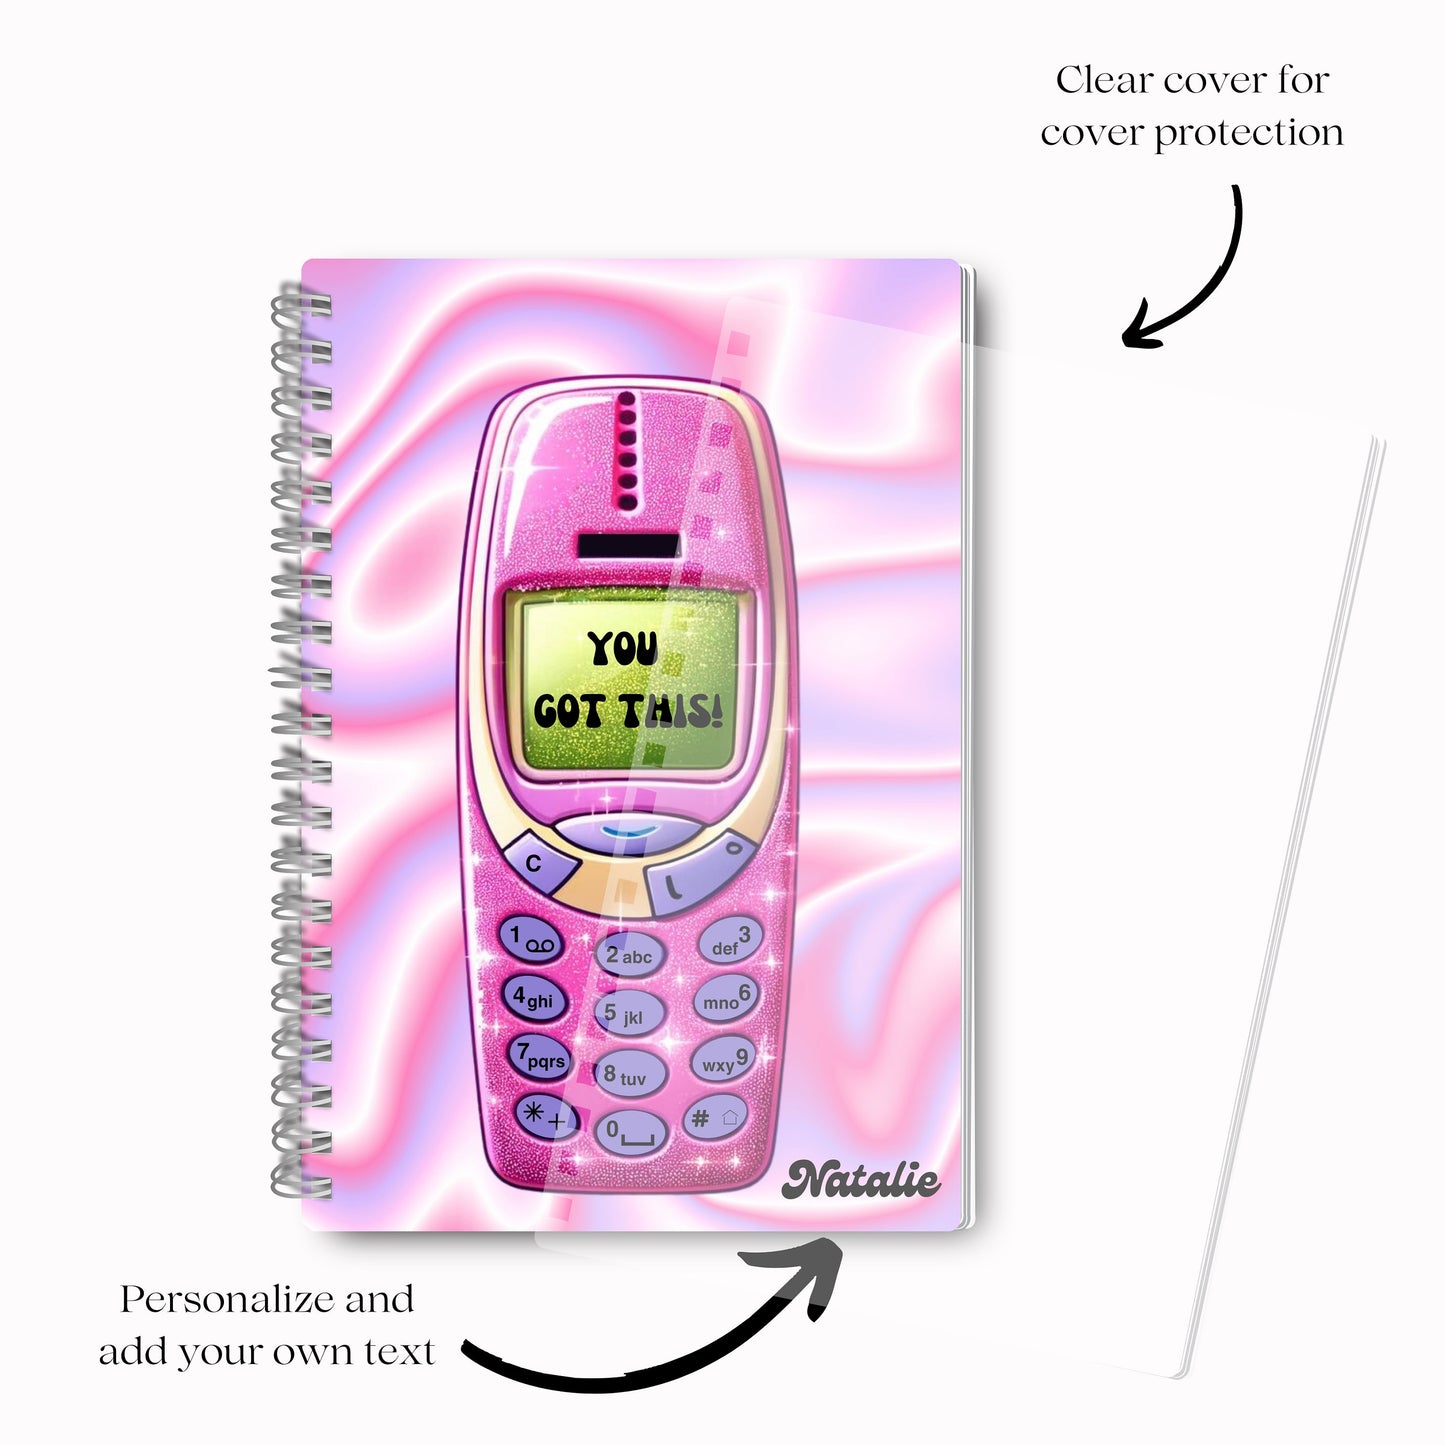 Retro 90s Cell Phone Notebook the perfect personalized gift for teens - Holographic Glitter, Motivational Diary, Gift for Her, Trending, Y2K